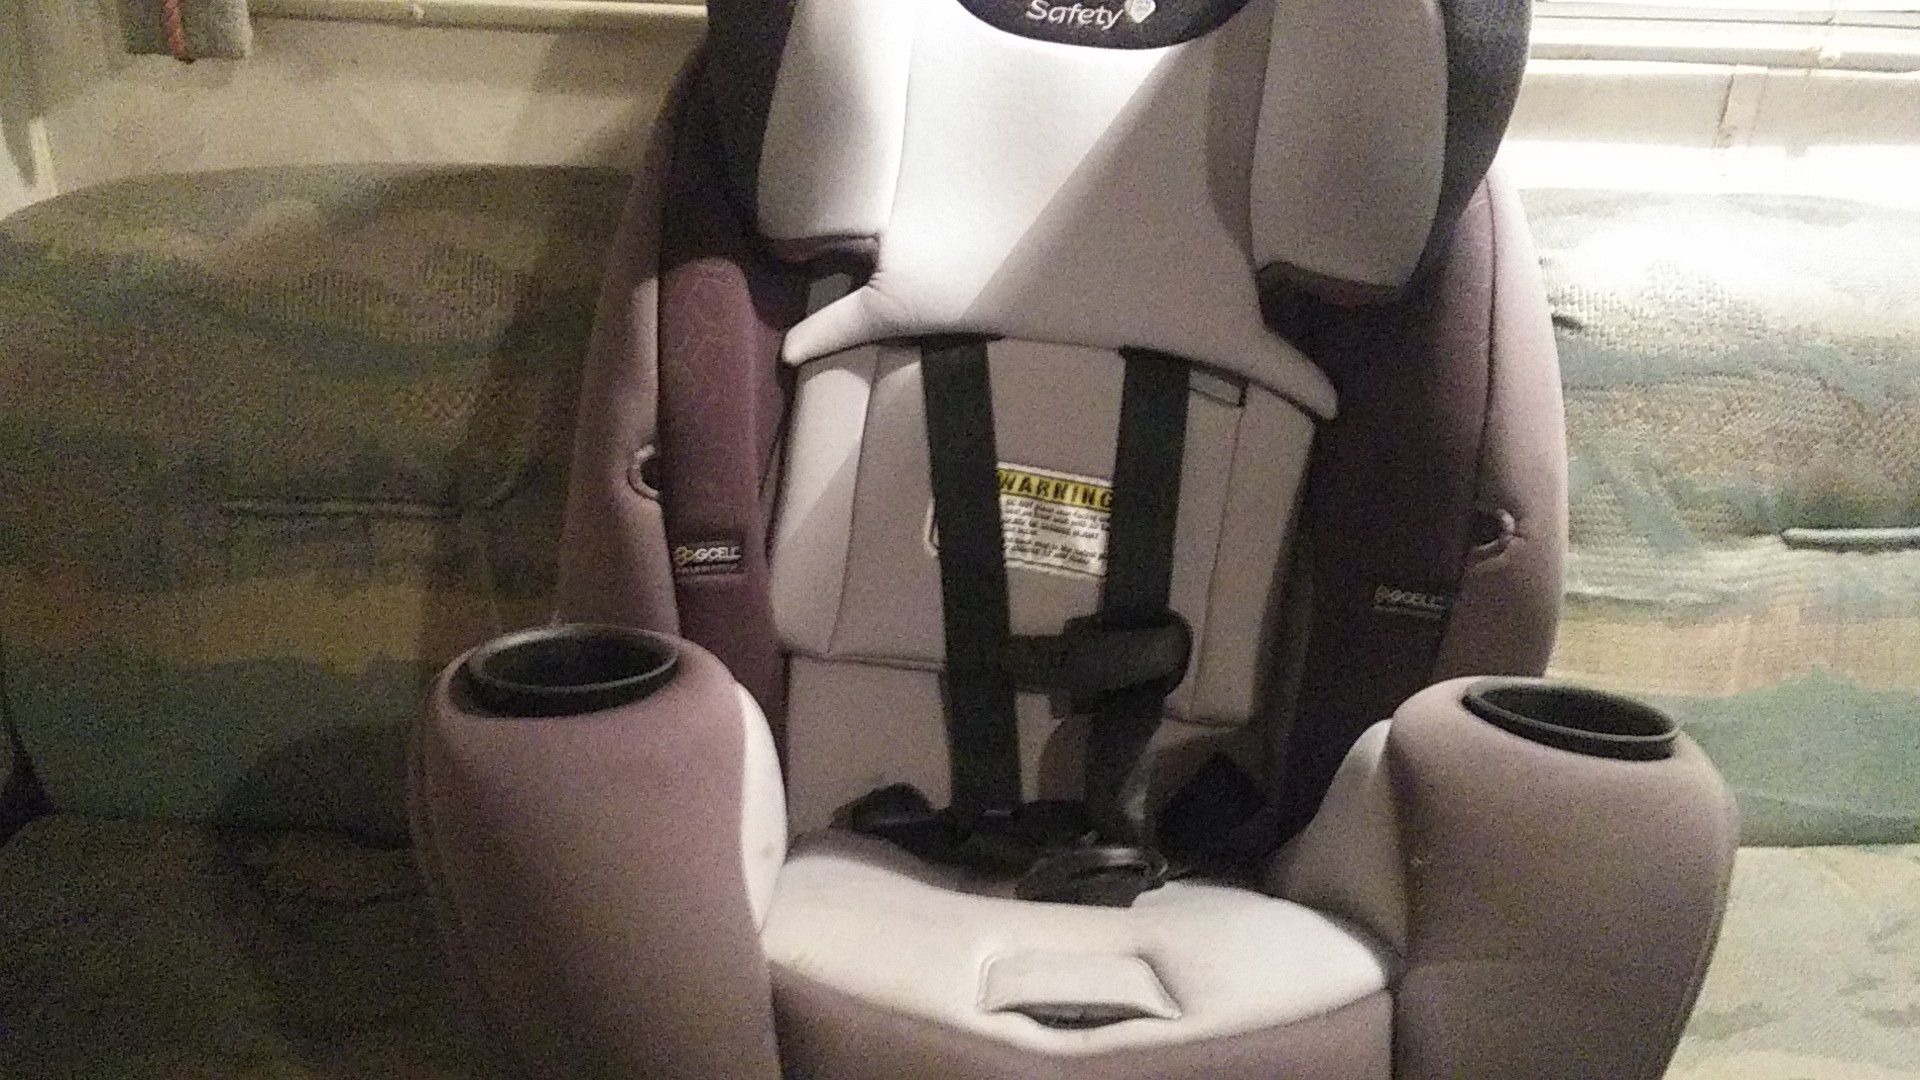 Almost New Safety 1st Car Seat